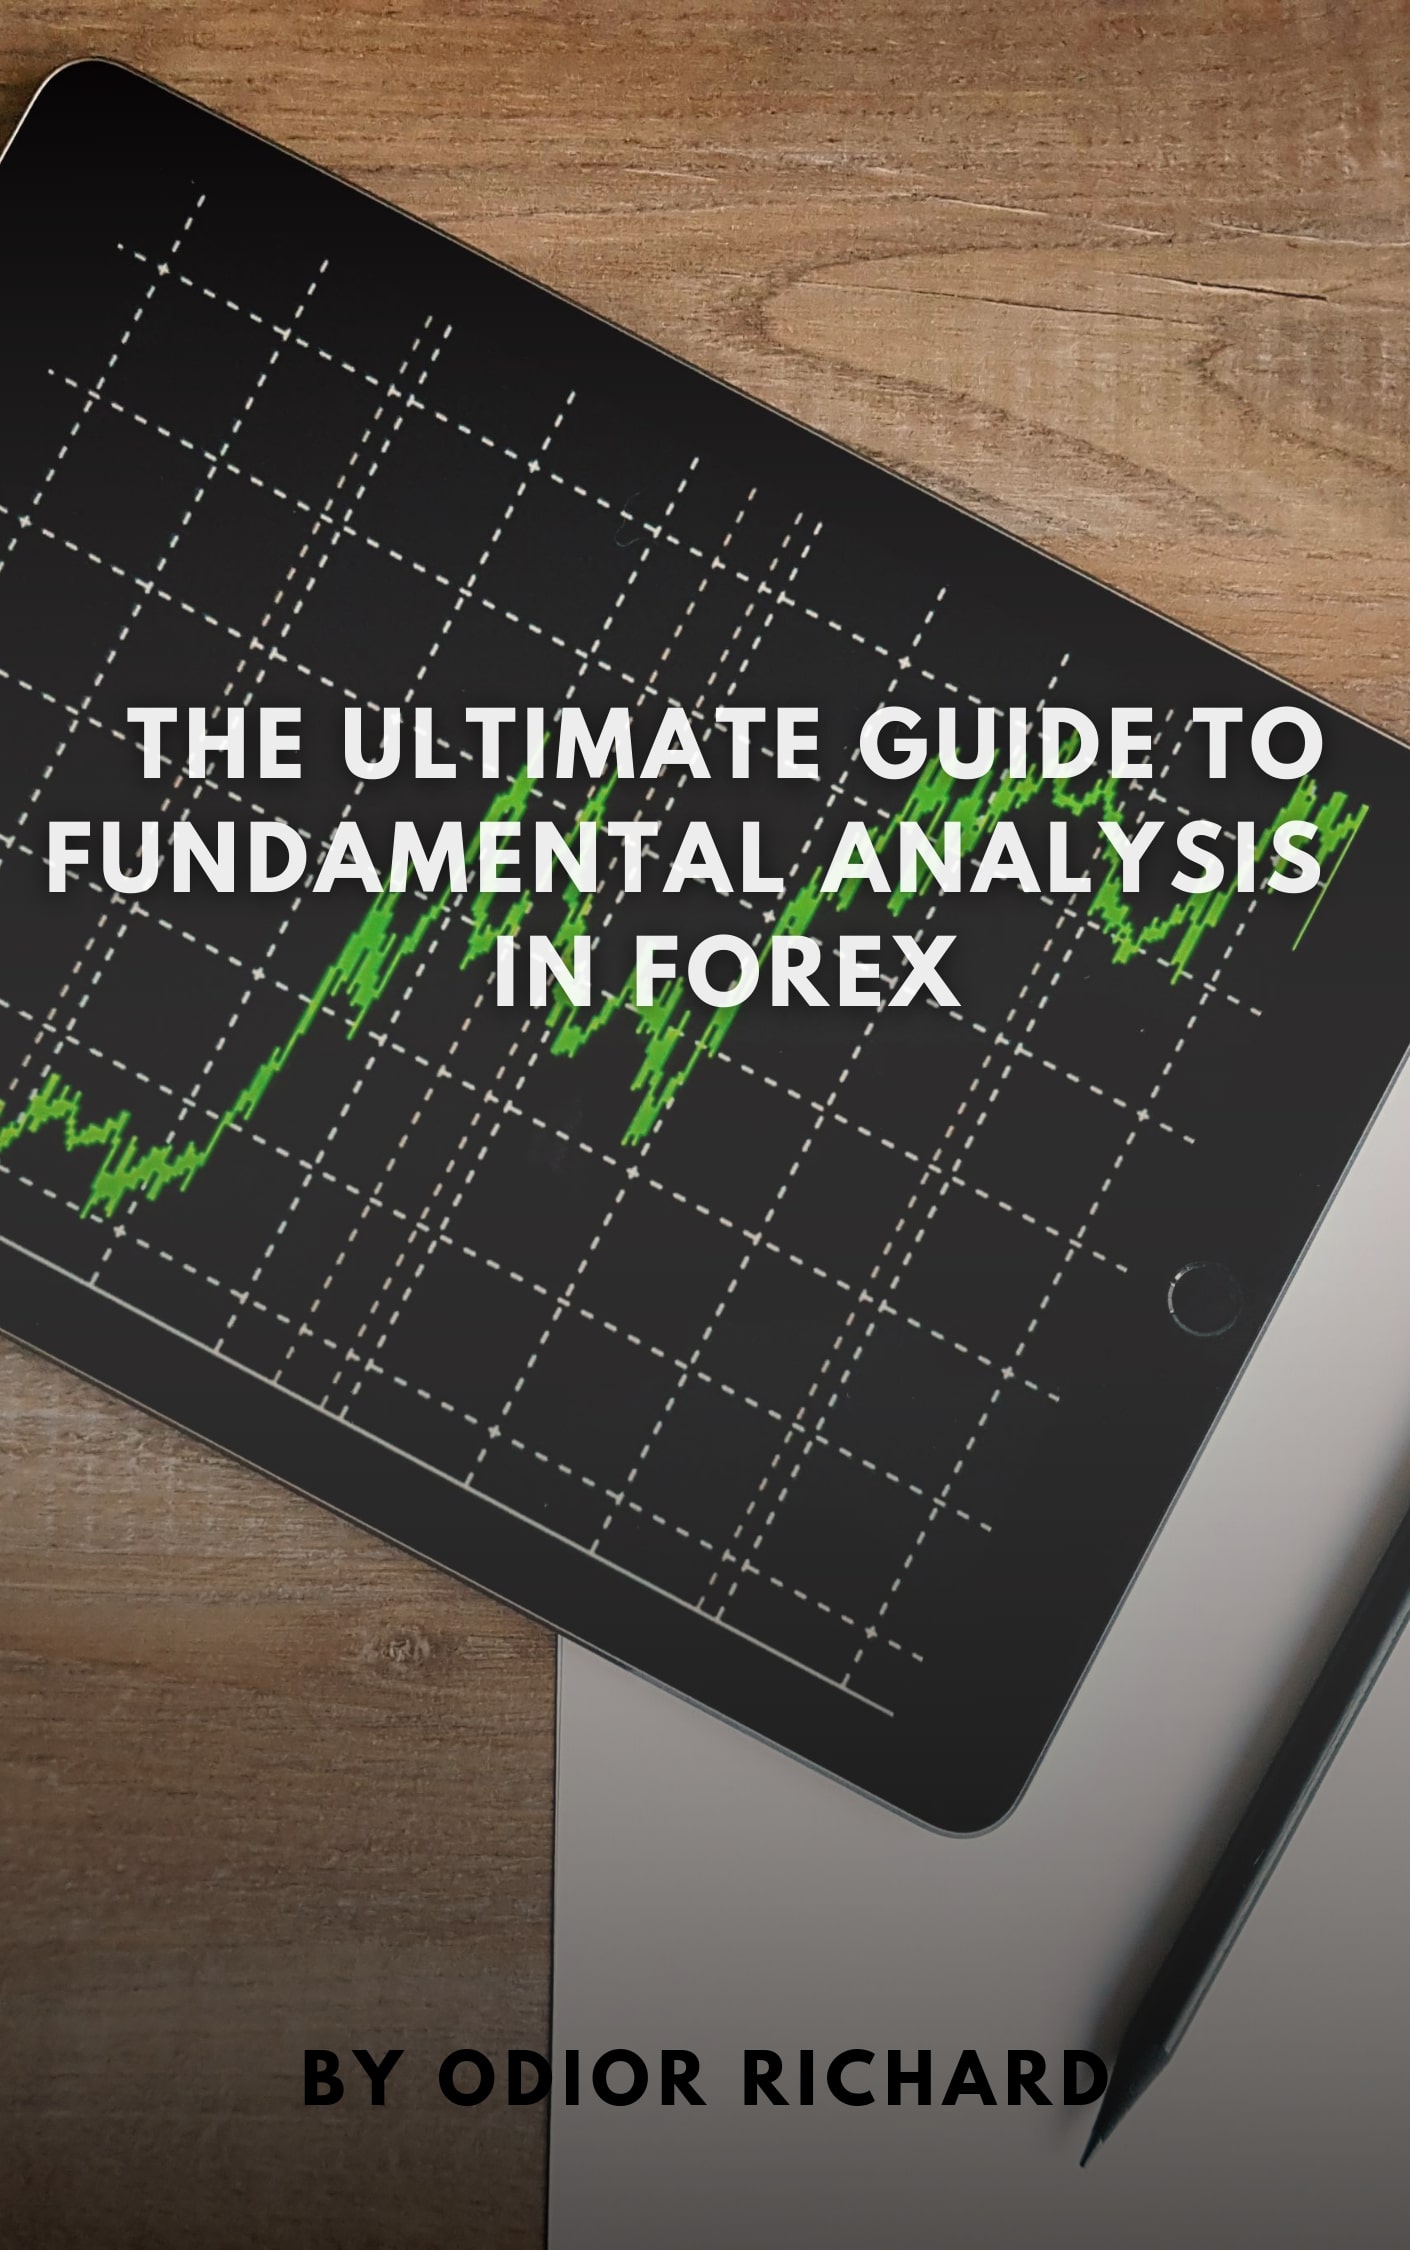 FREE: The ultimate guide to fundamental analysis in forex by Odior Richard